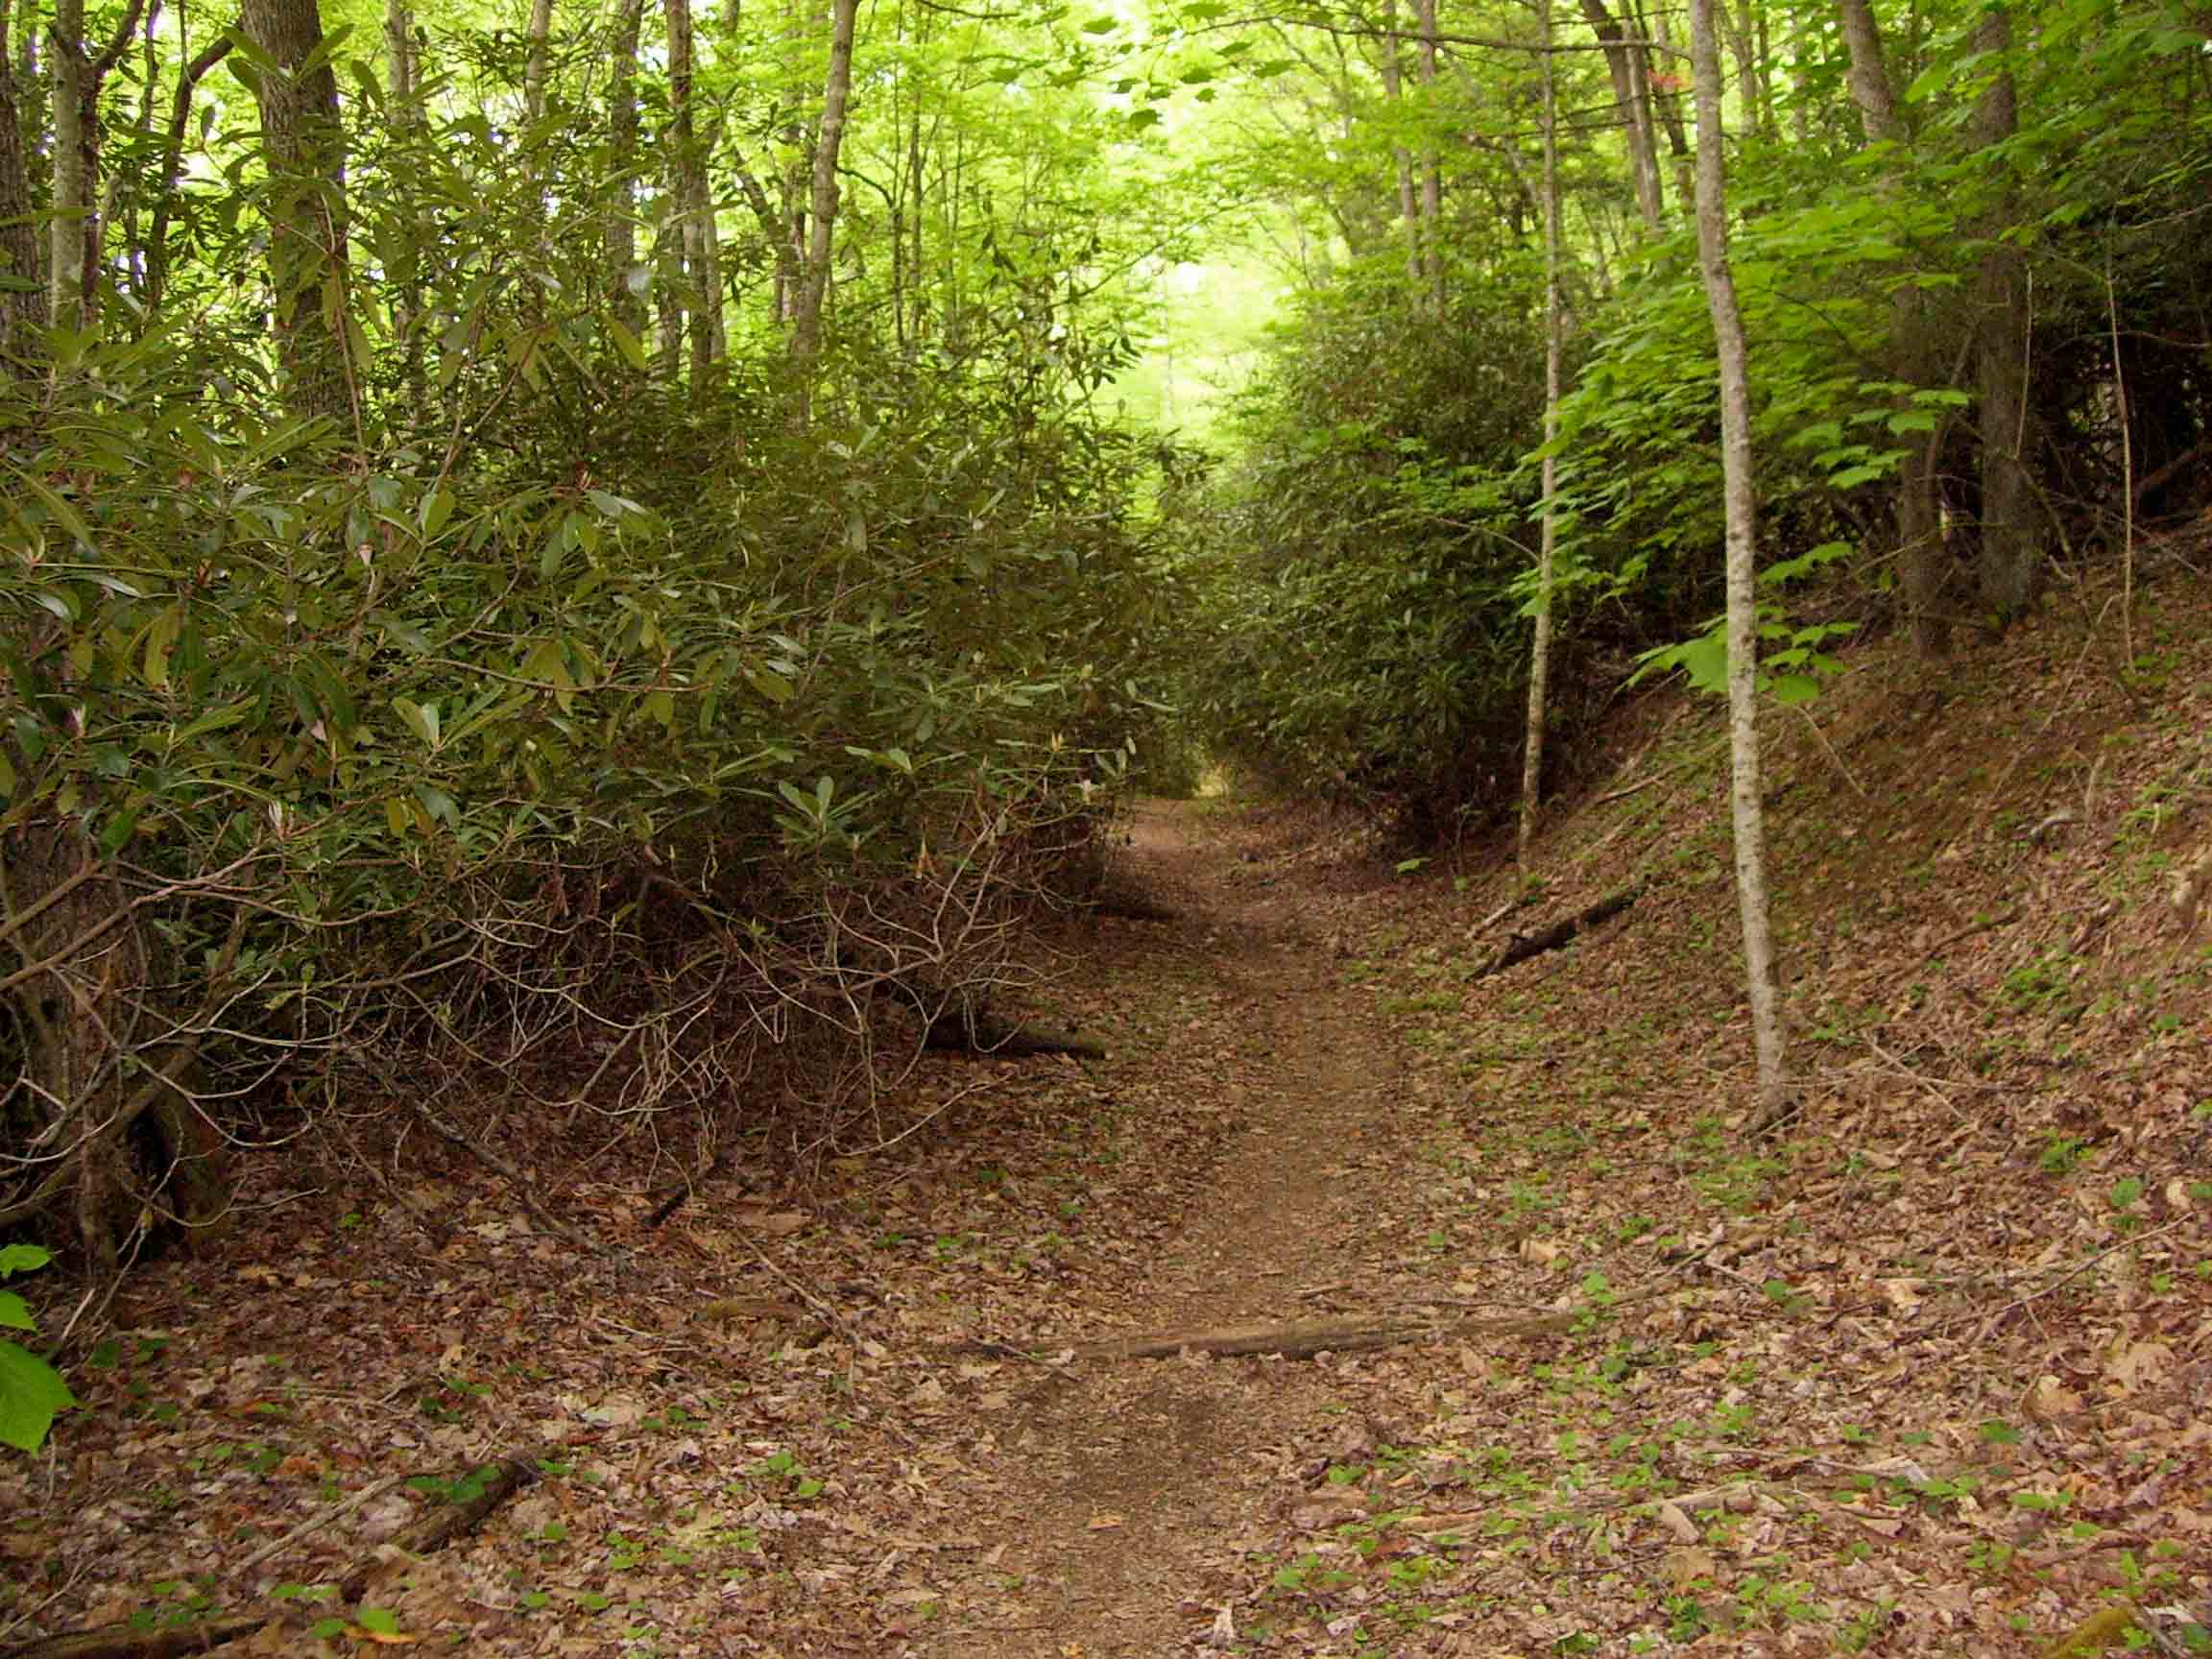 This area was the scene of extensive manganese mining up through World War II. The trail follows an old mining road for about two miles from MM 0.4 to 2.5. Much of it goes through rhododendron thickets such as seen here.  Courtesy dlcul@conncoll.edu